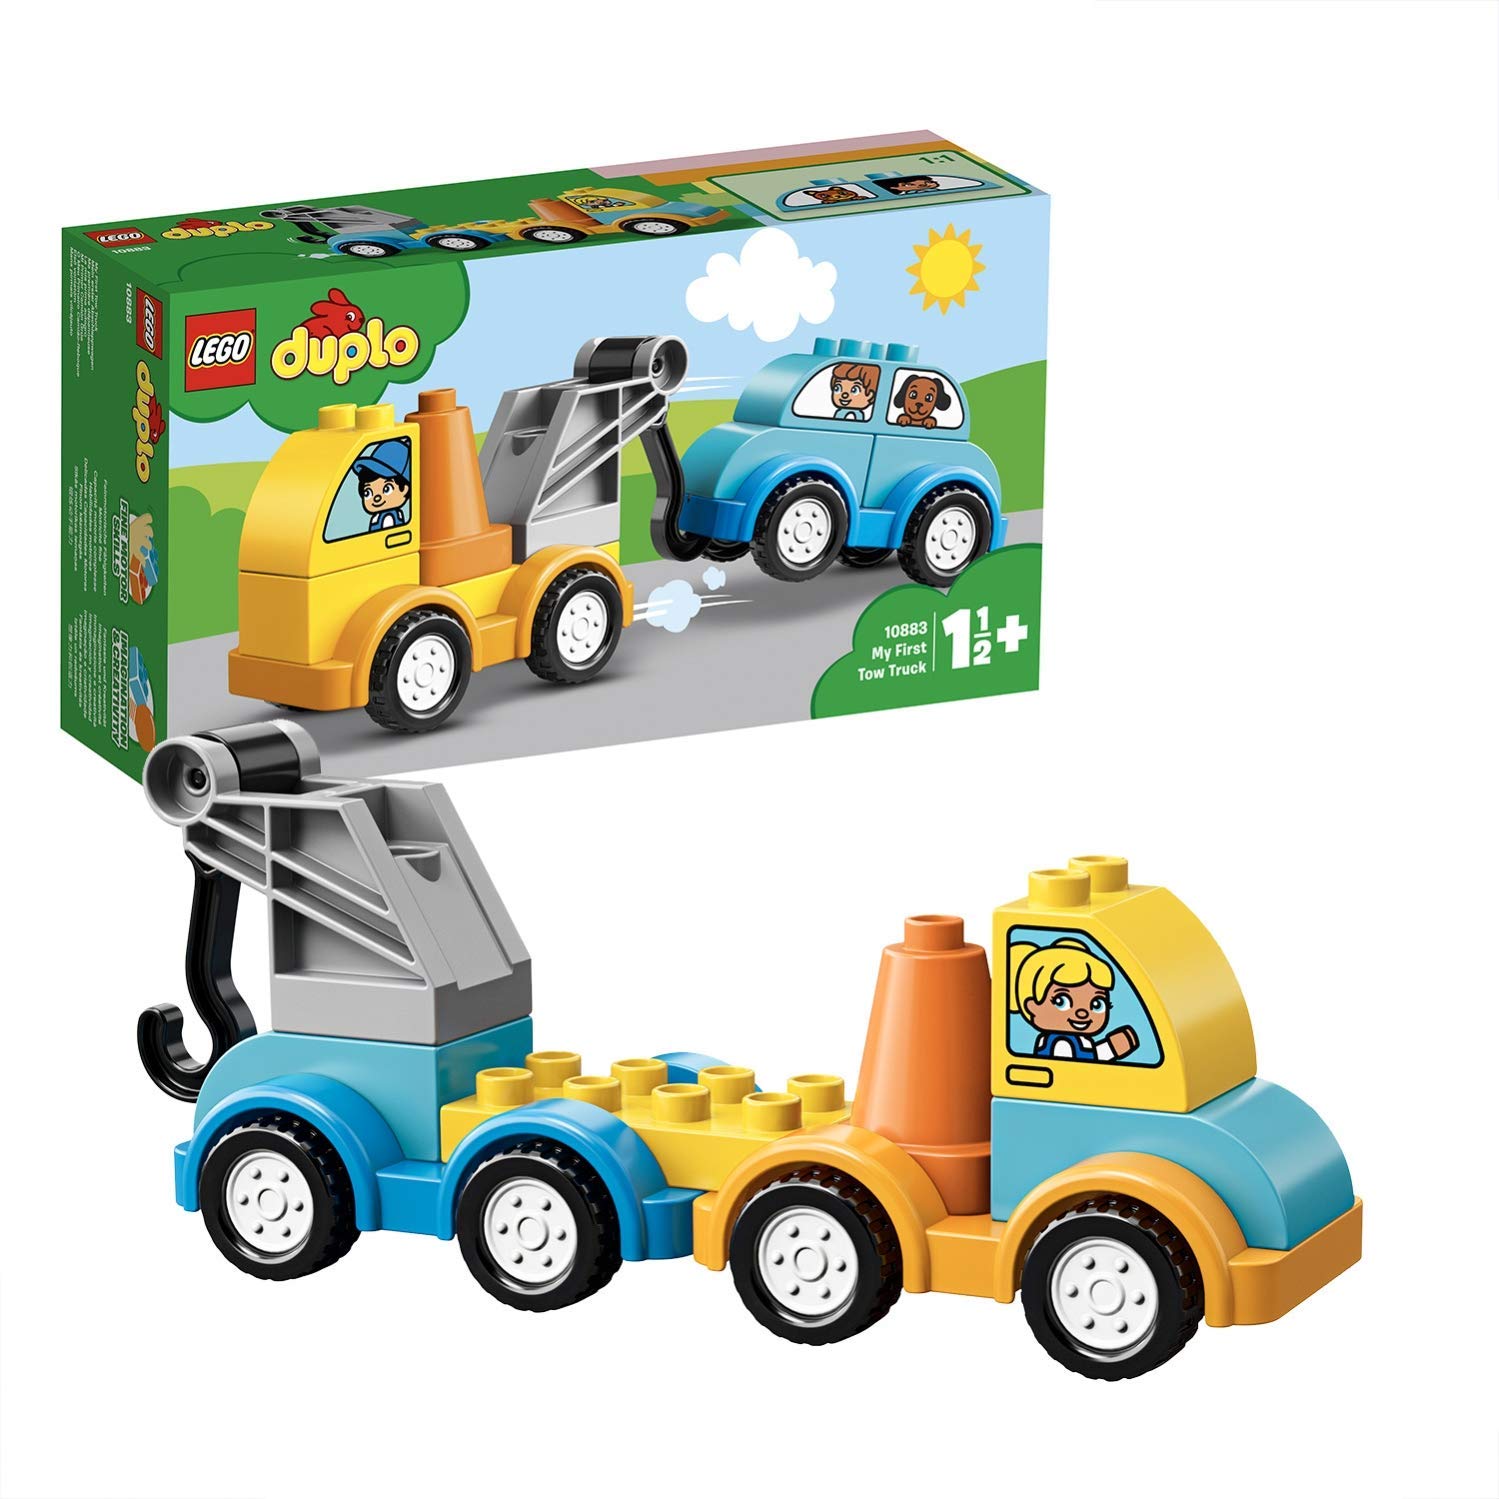 Lego Duplo 10883 - My First Tow Truck